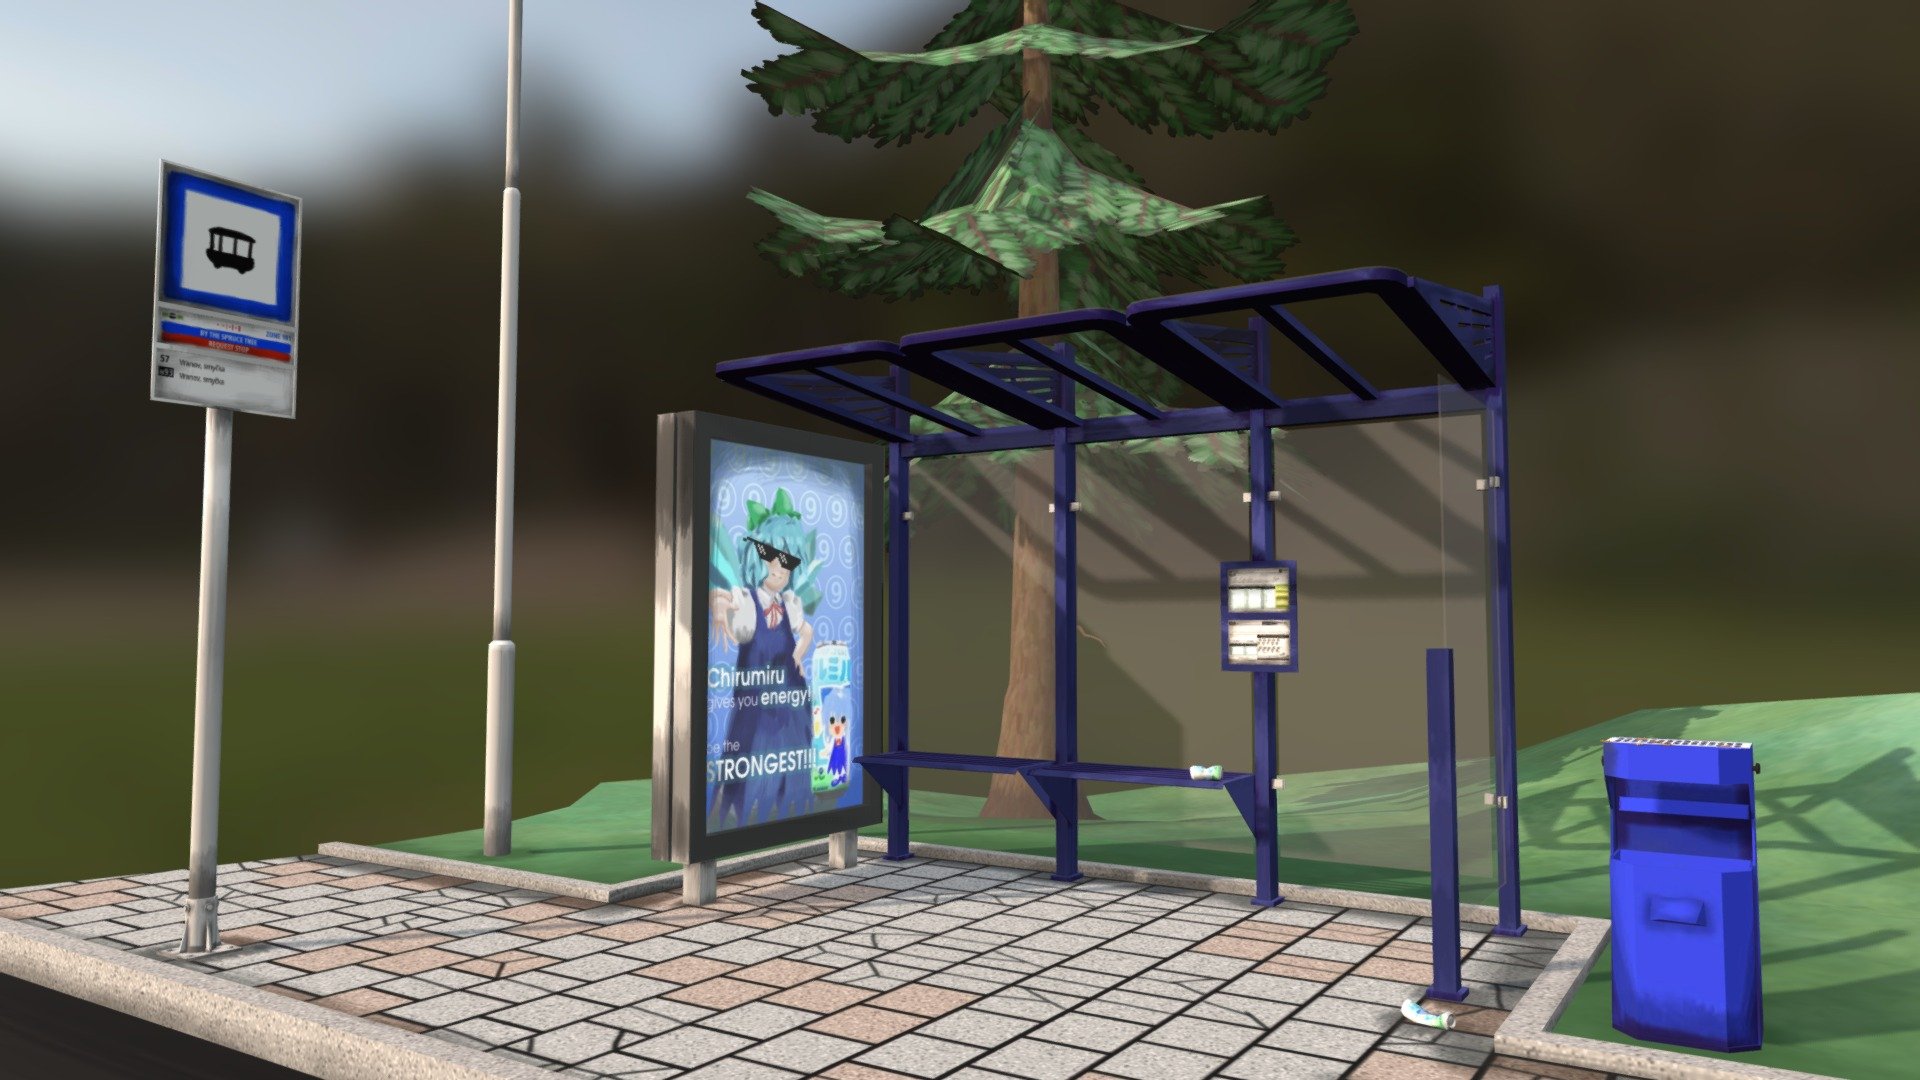 inspired by various bus stops - Bus Stop - 3D model by mz (@1326) 3d model